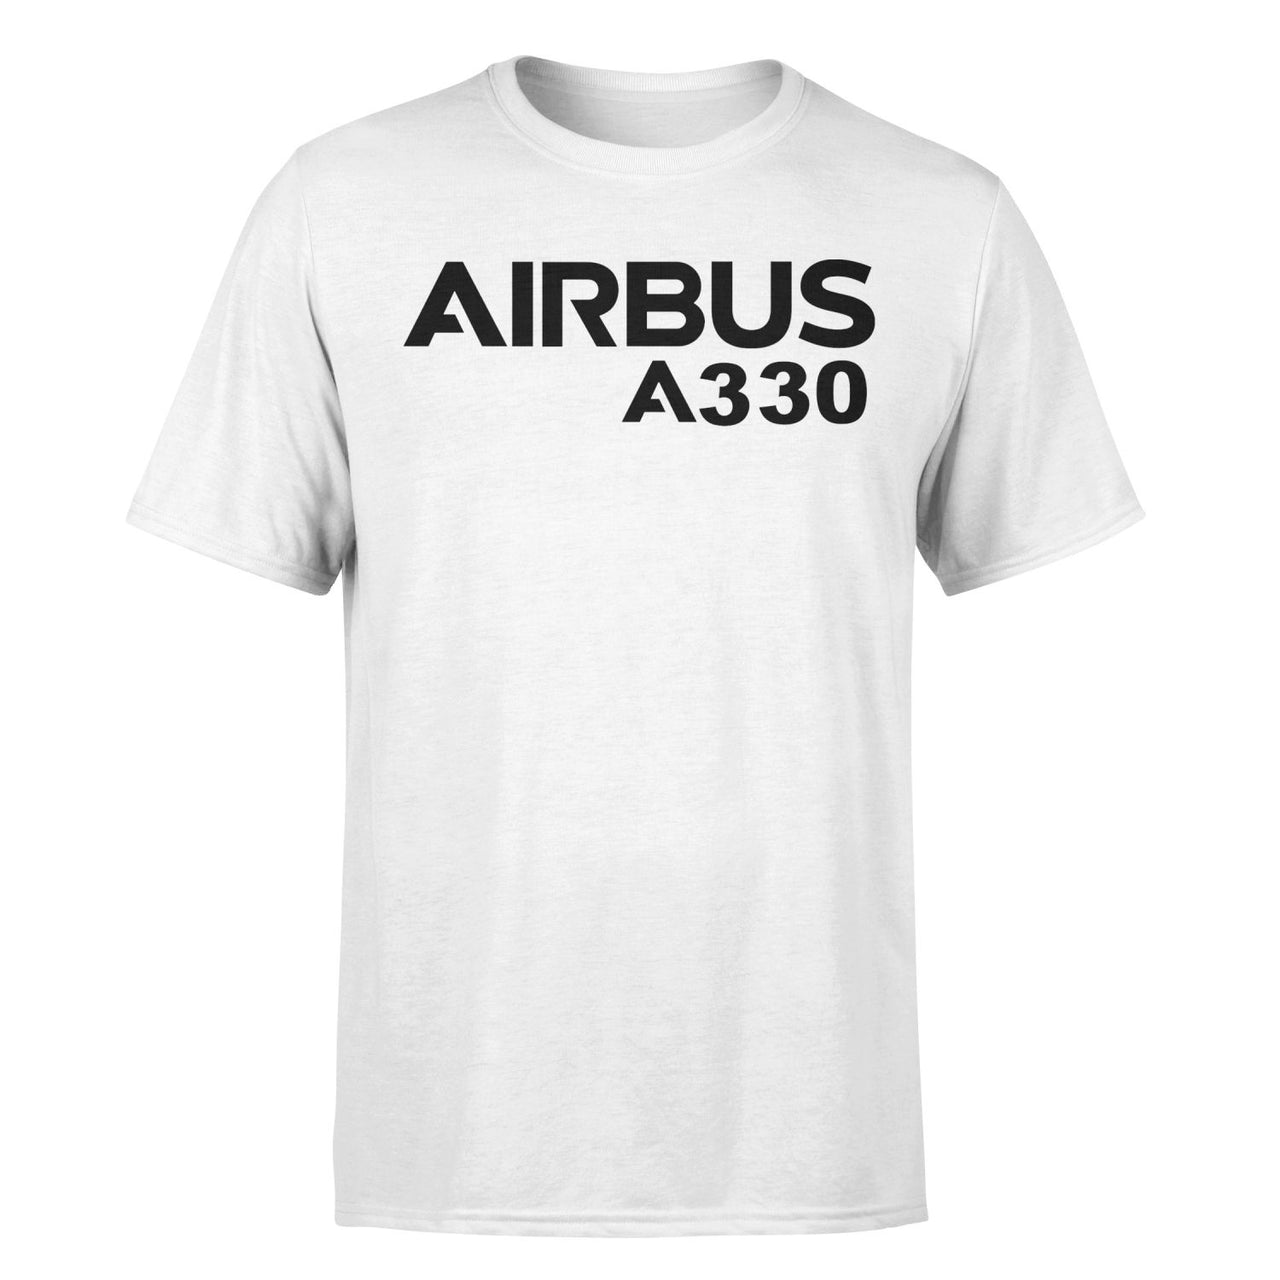 Airbus A330 & Text Designed T-Shirts